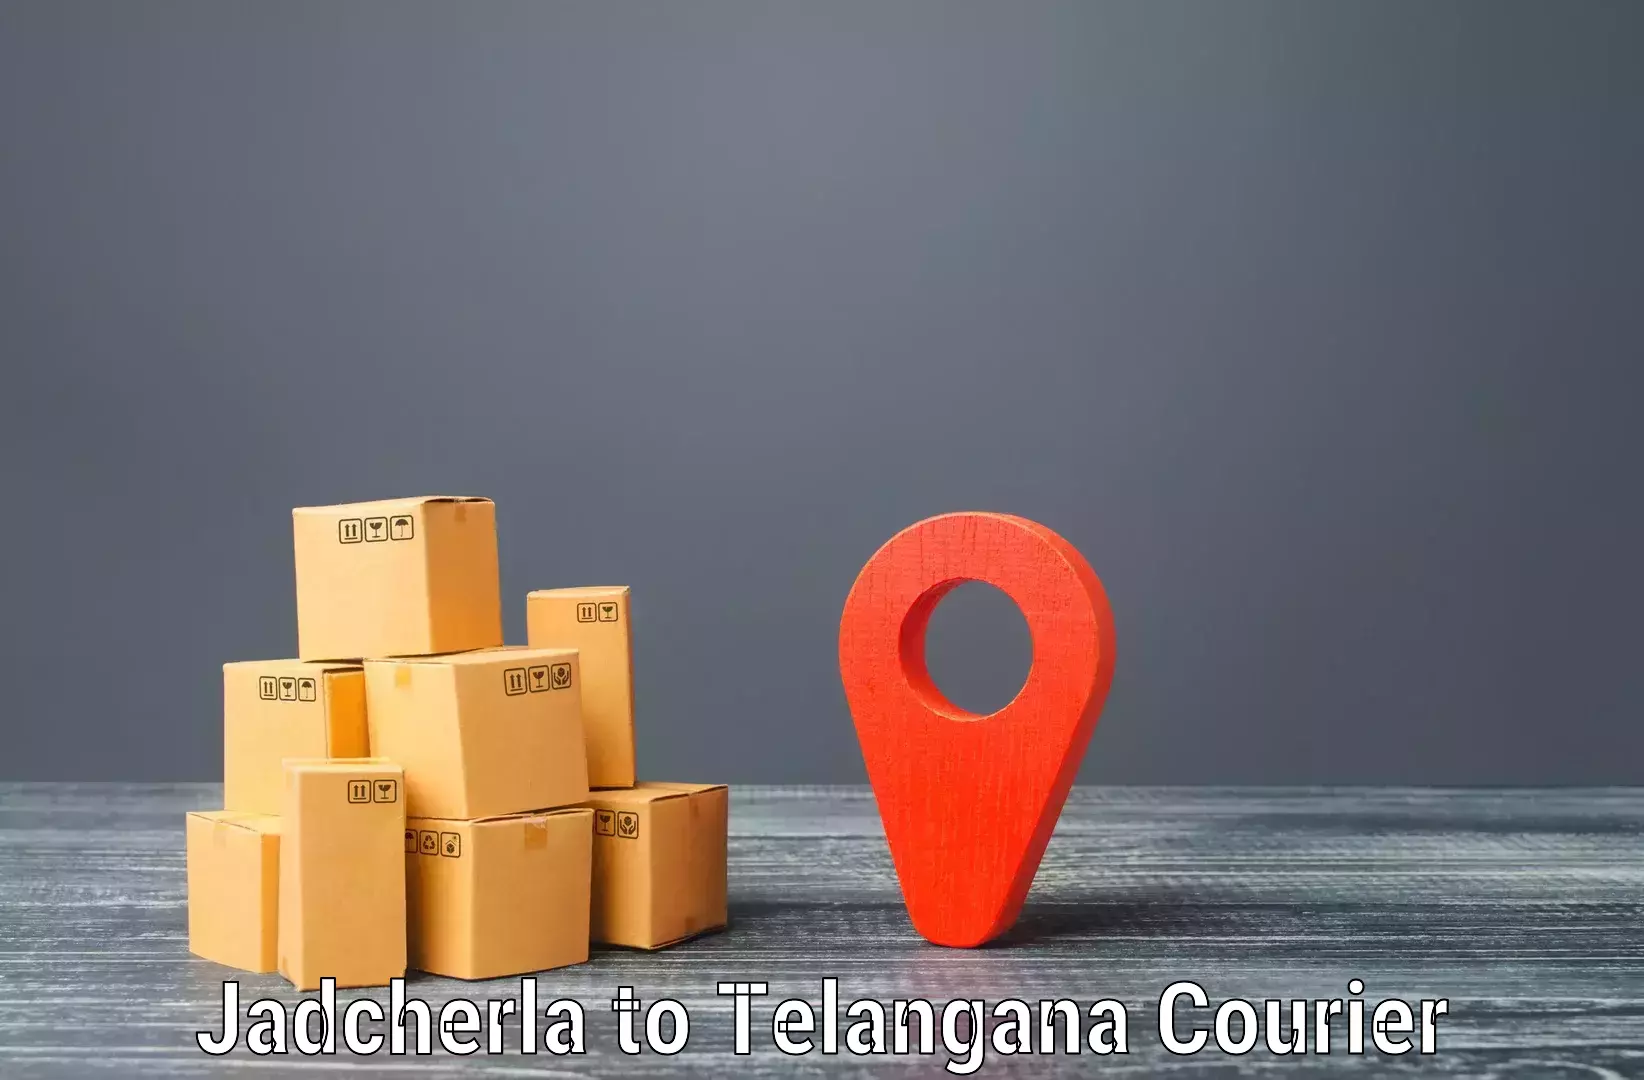 Reliable shipping partners Jadcherla to Hyderabad